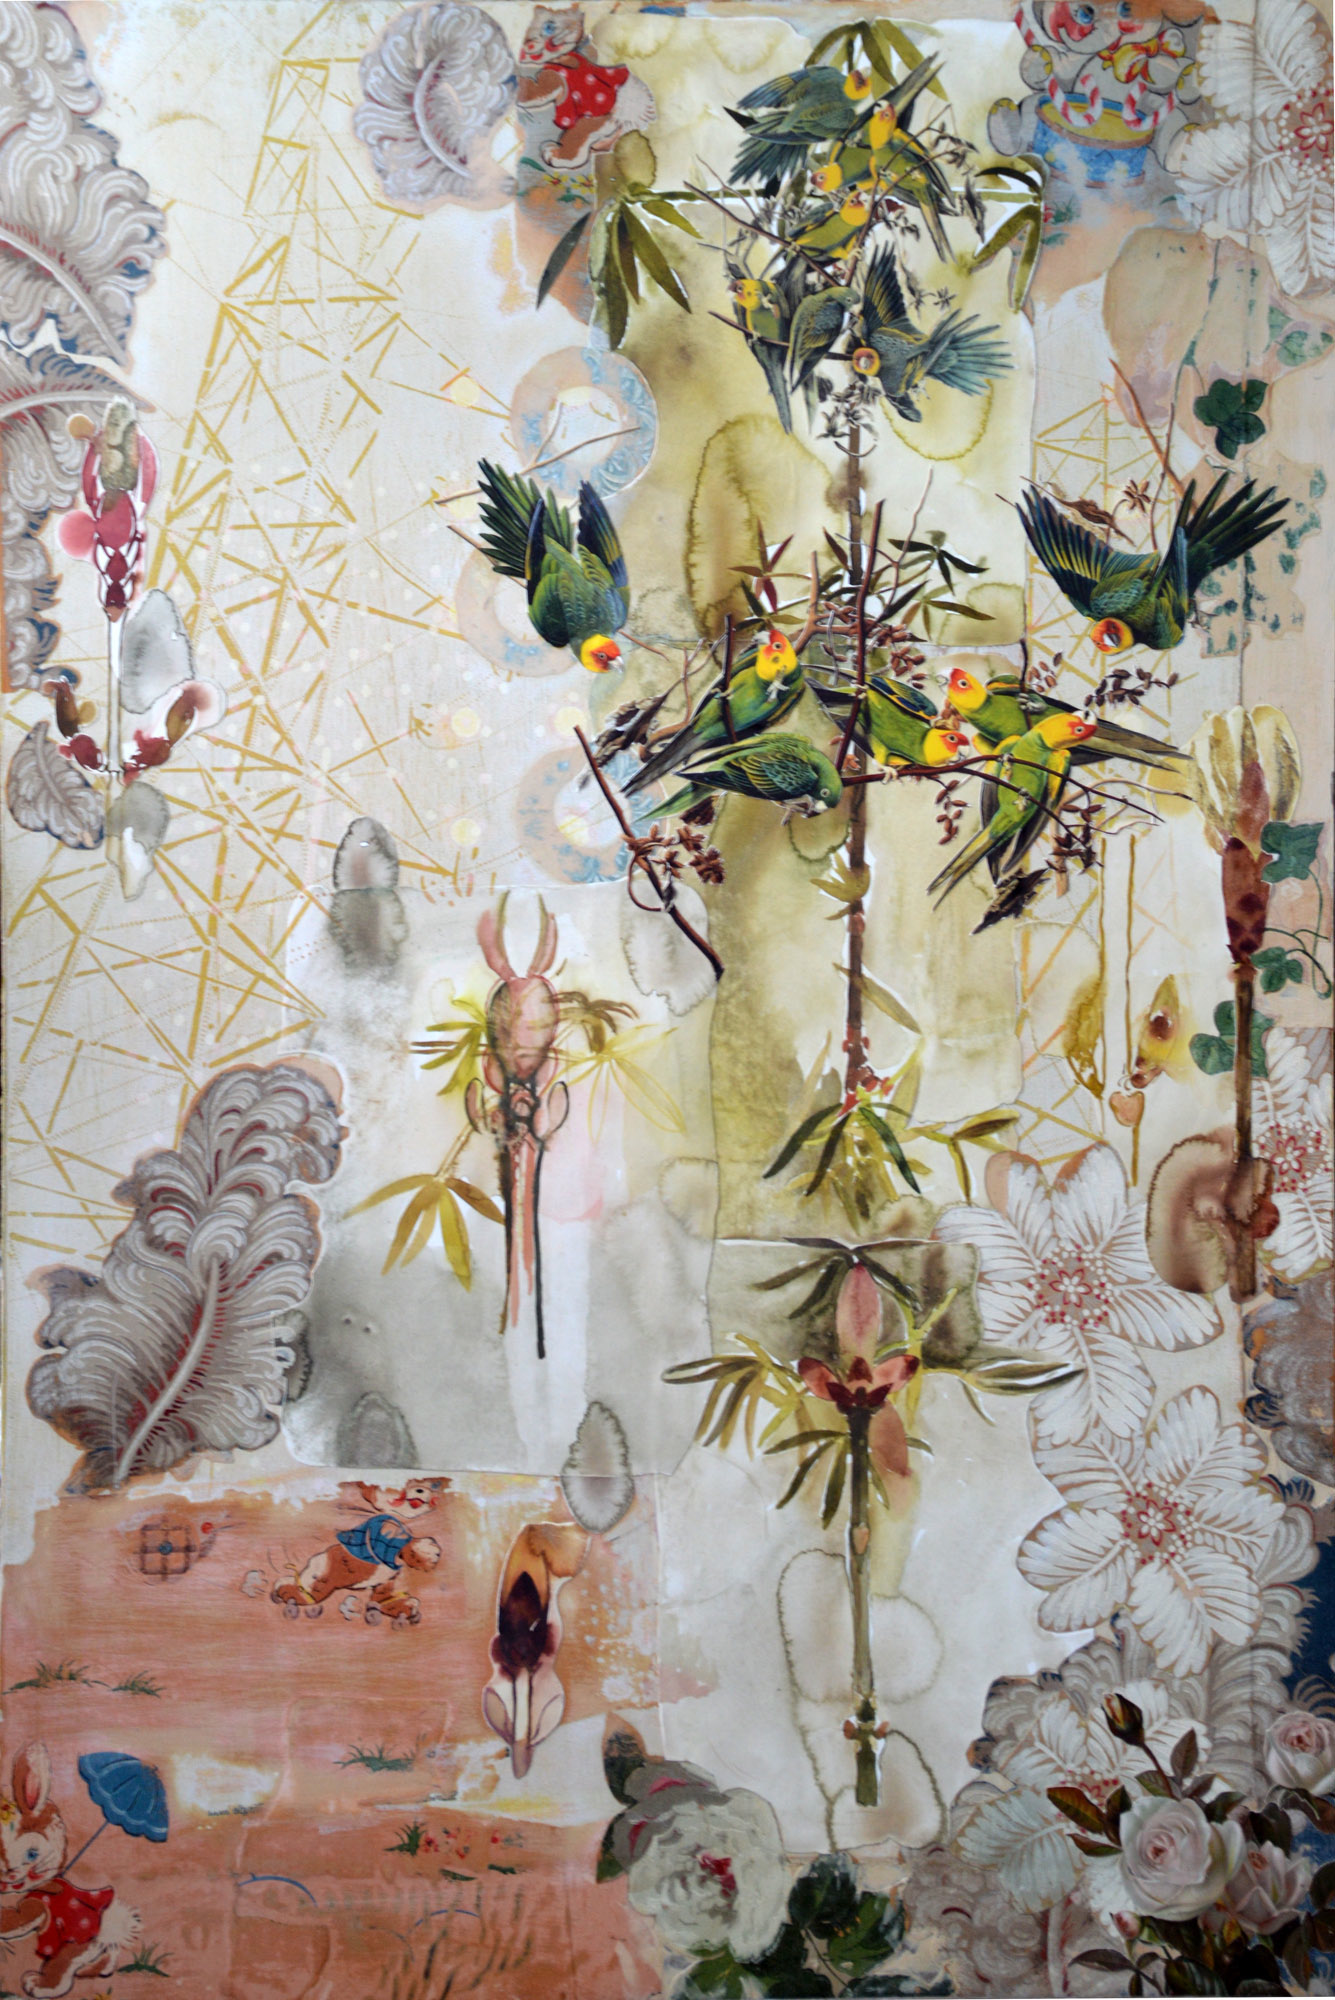 2. Budding Chestnuts, mixed media collage, 48x32, Maggy Aston.jpg